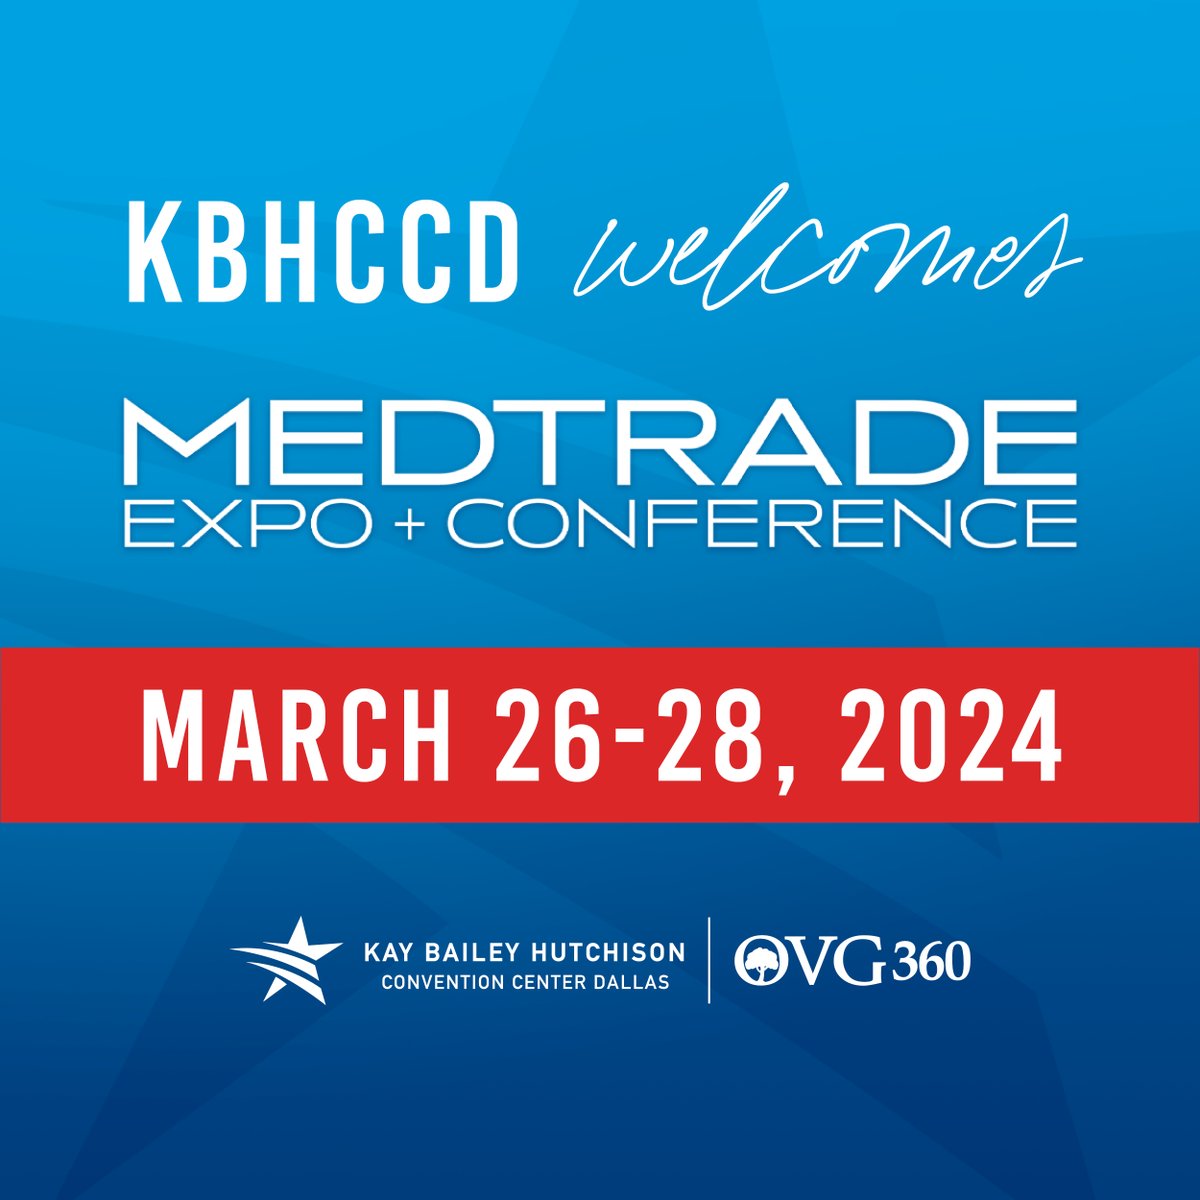 We’re excited to welcome the nation’s largest home medical equipment trade show and conference to #KBHCCD – @MedtradeConnect! Here's to an exciting few days of learning and connecting in the heart of Dallas! #Medtrade2024 | Concessions Menu: bit.ly/Medtrade2024Me…